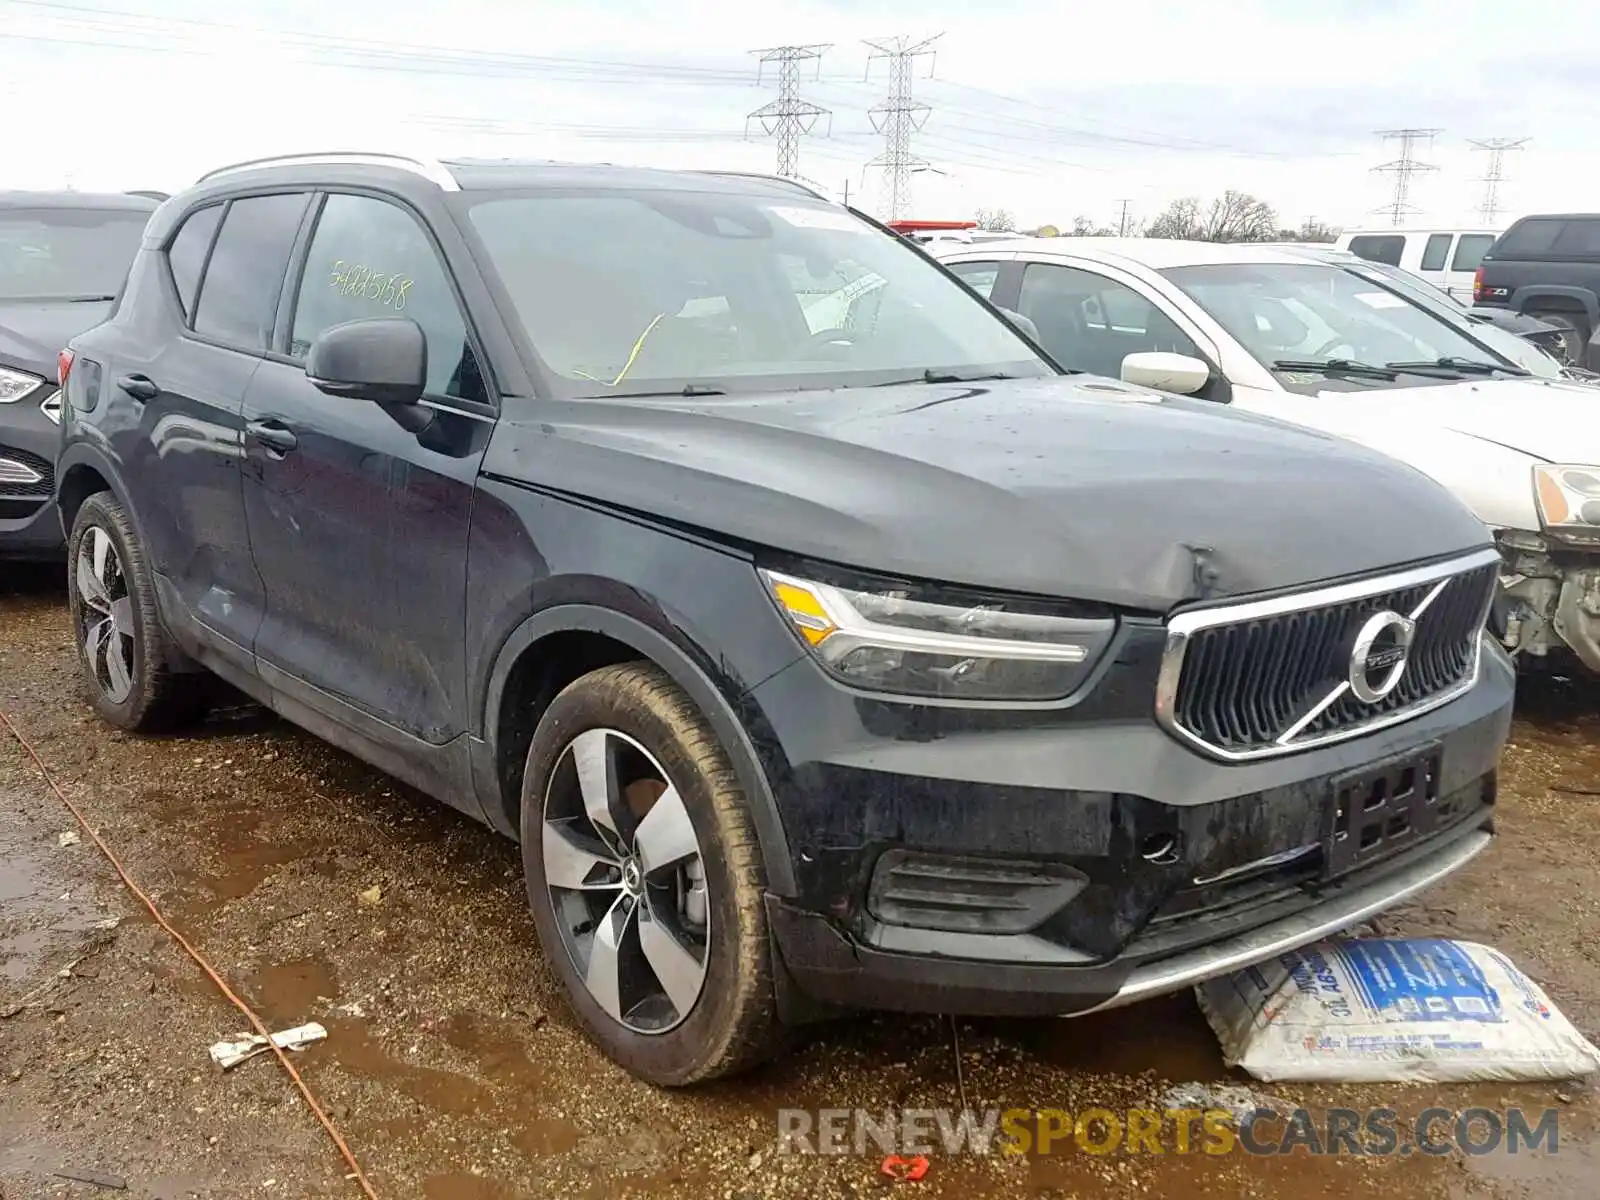 1 Photograph of a damaged car YV4162UK3K2053709 VOLVO XC40 T5 2019